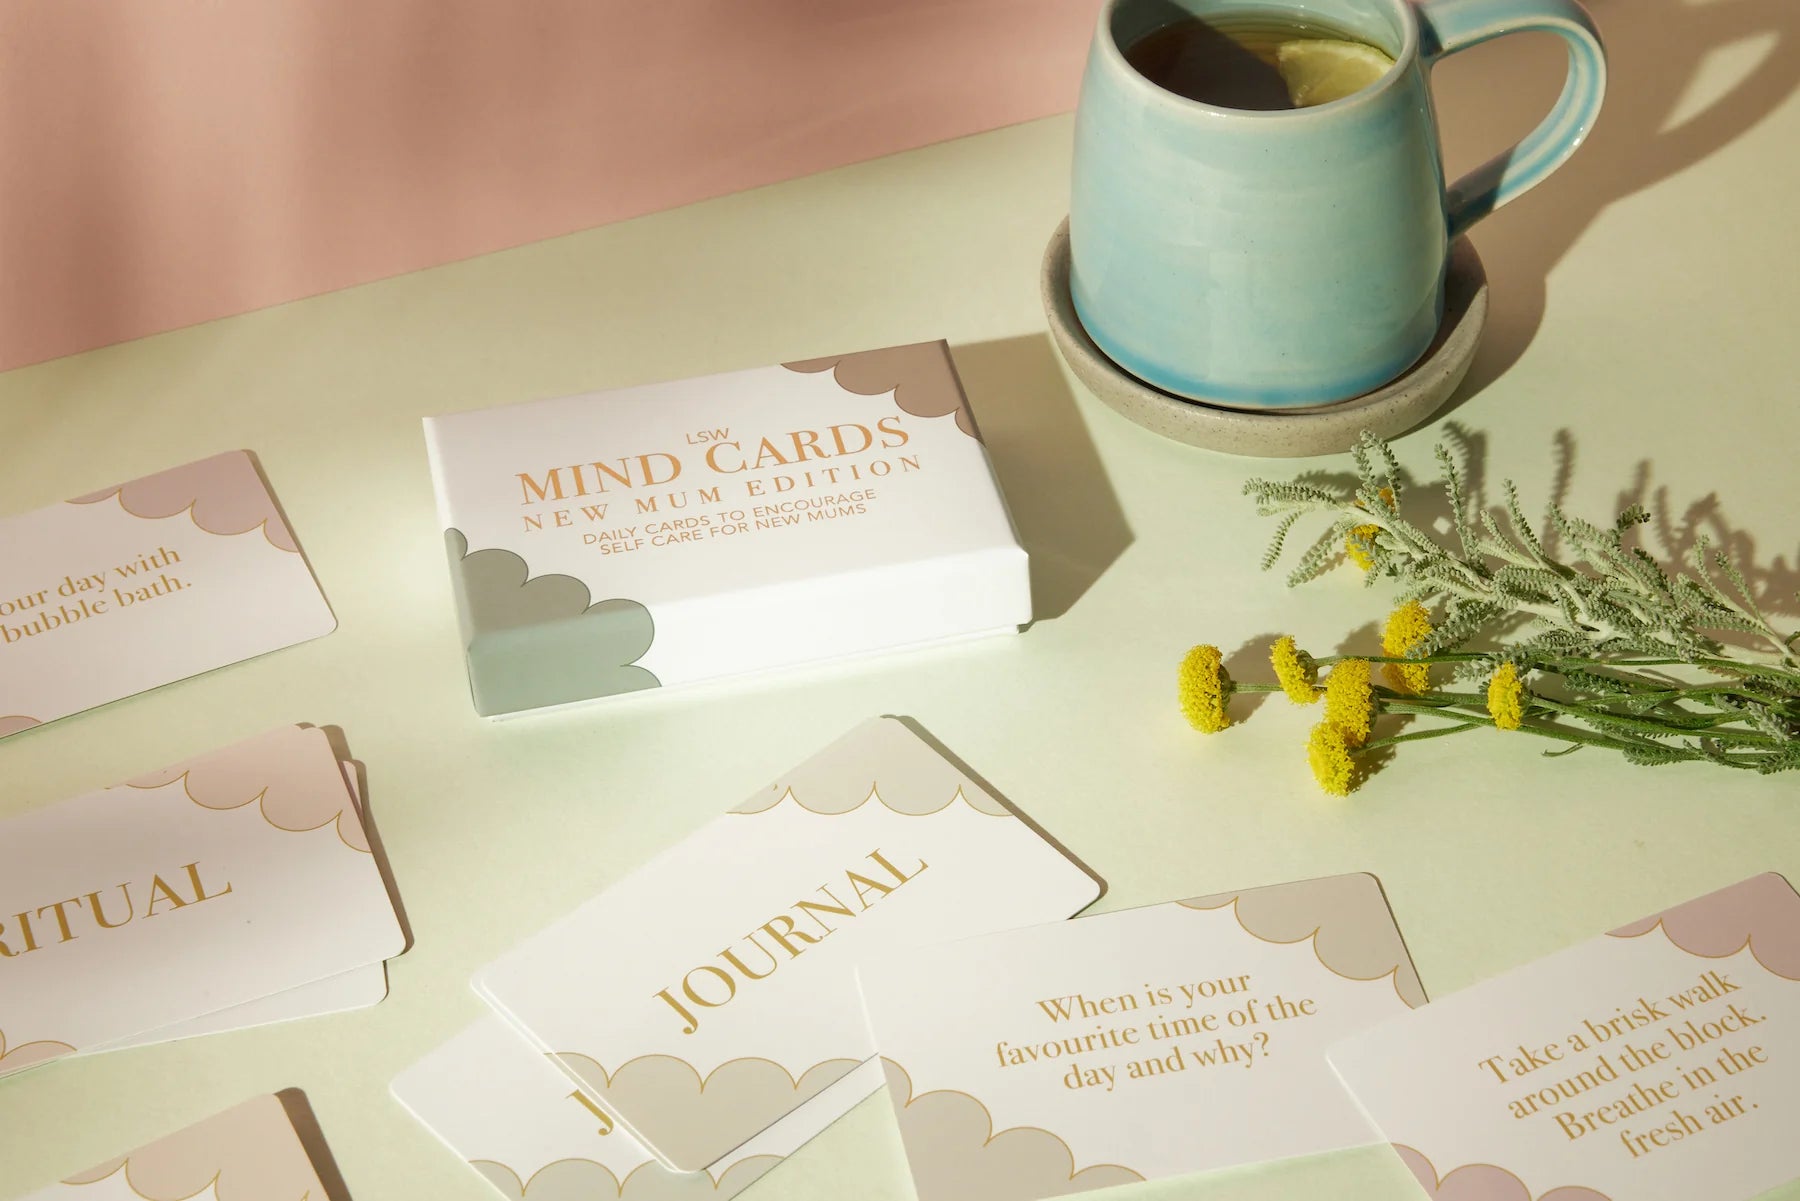 Fabulous Gifts Mind Cards Mum Edition Card by Weirs of Baggot Street